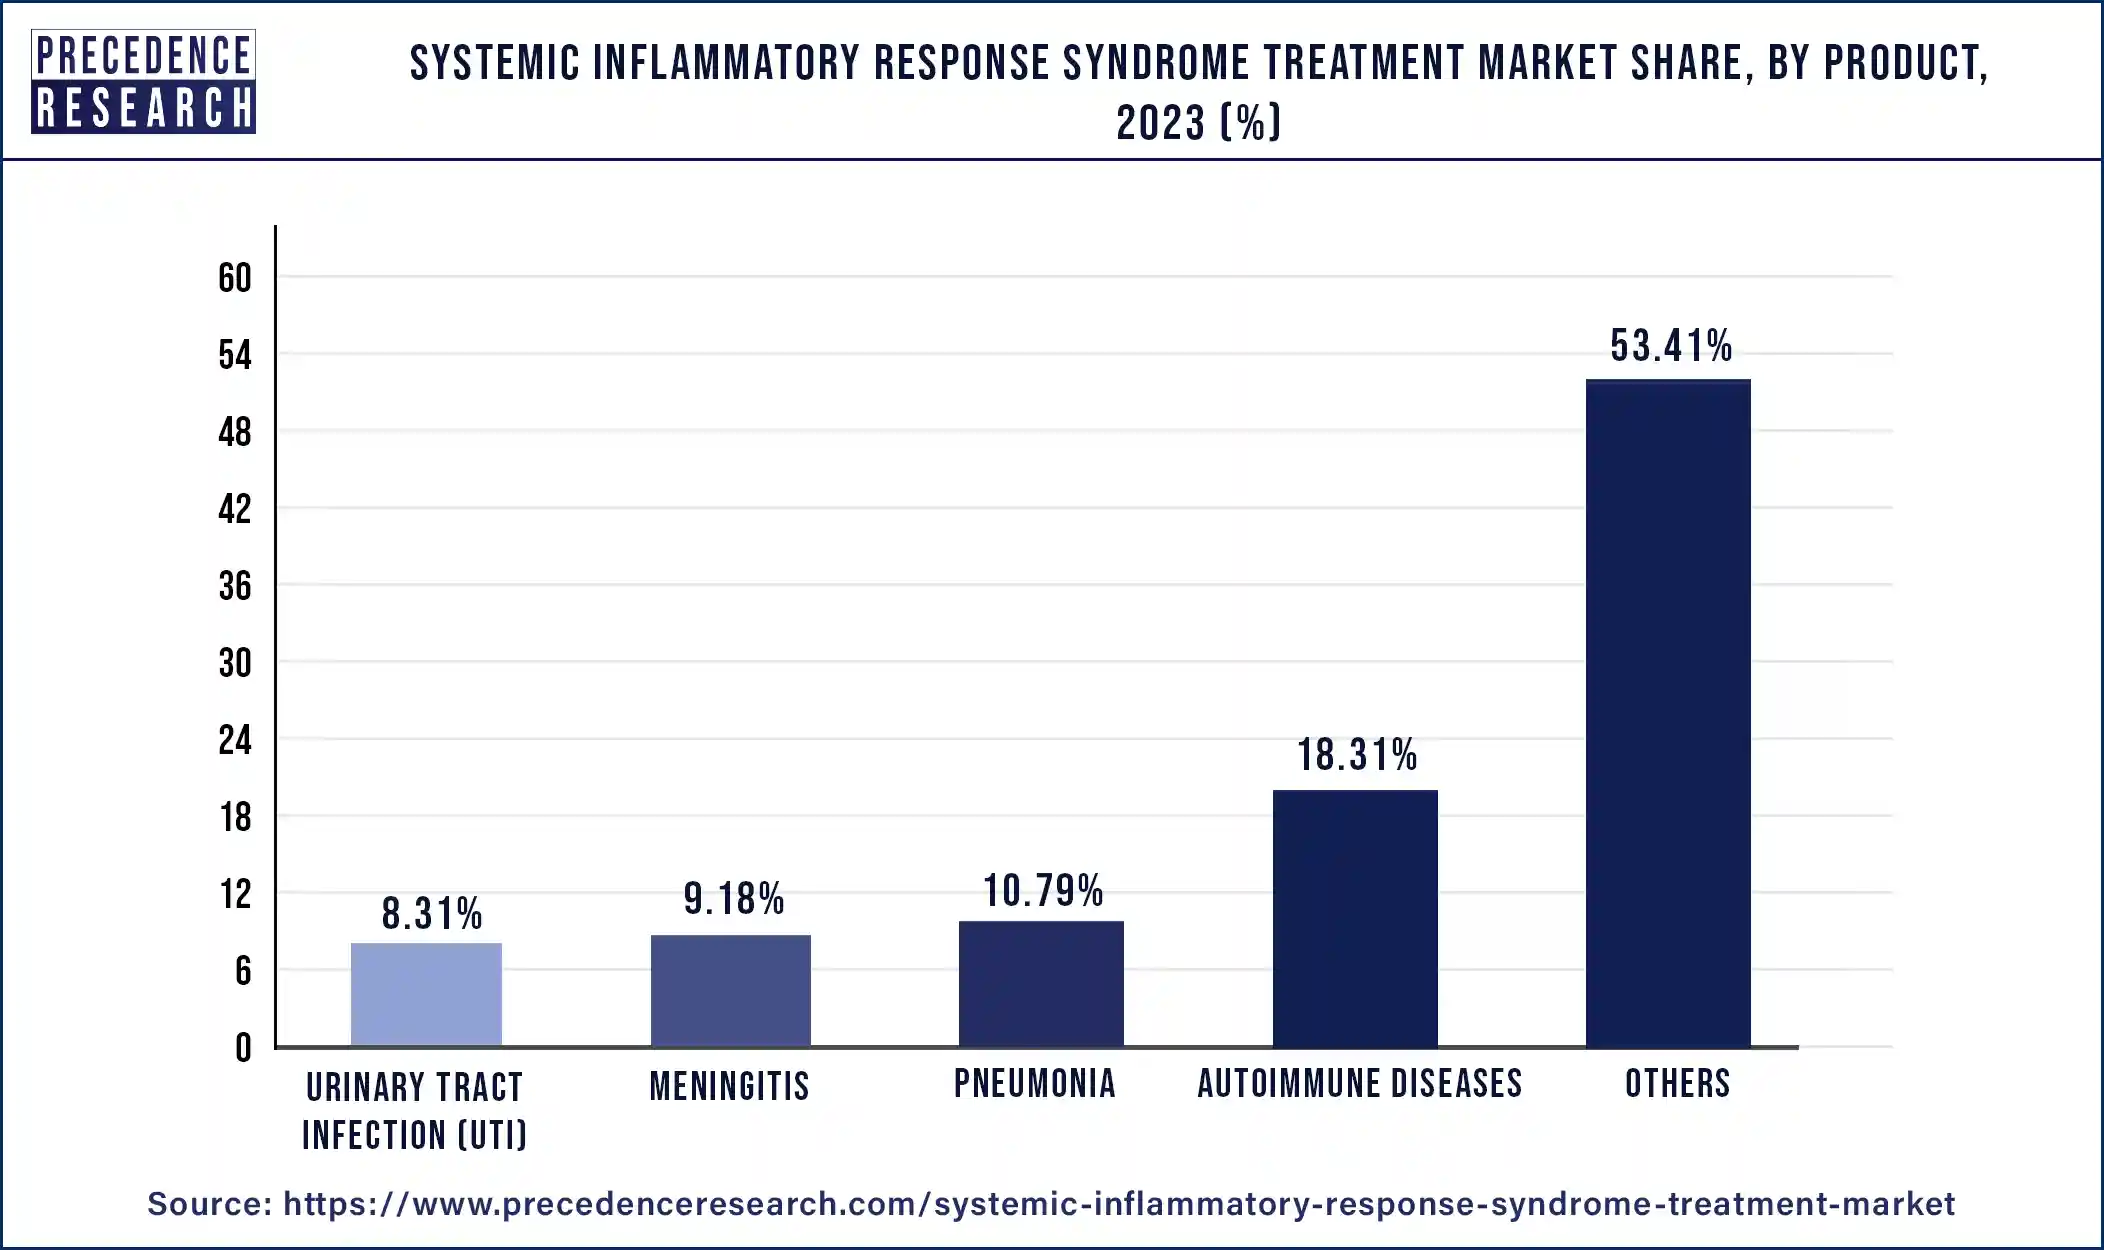 Systemic Inflammatory Response Syndrome Treatment Market Share By Product, 2023 (%)